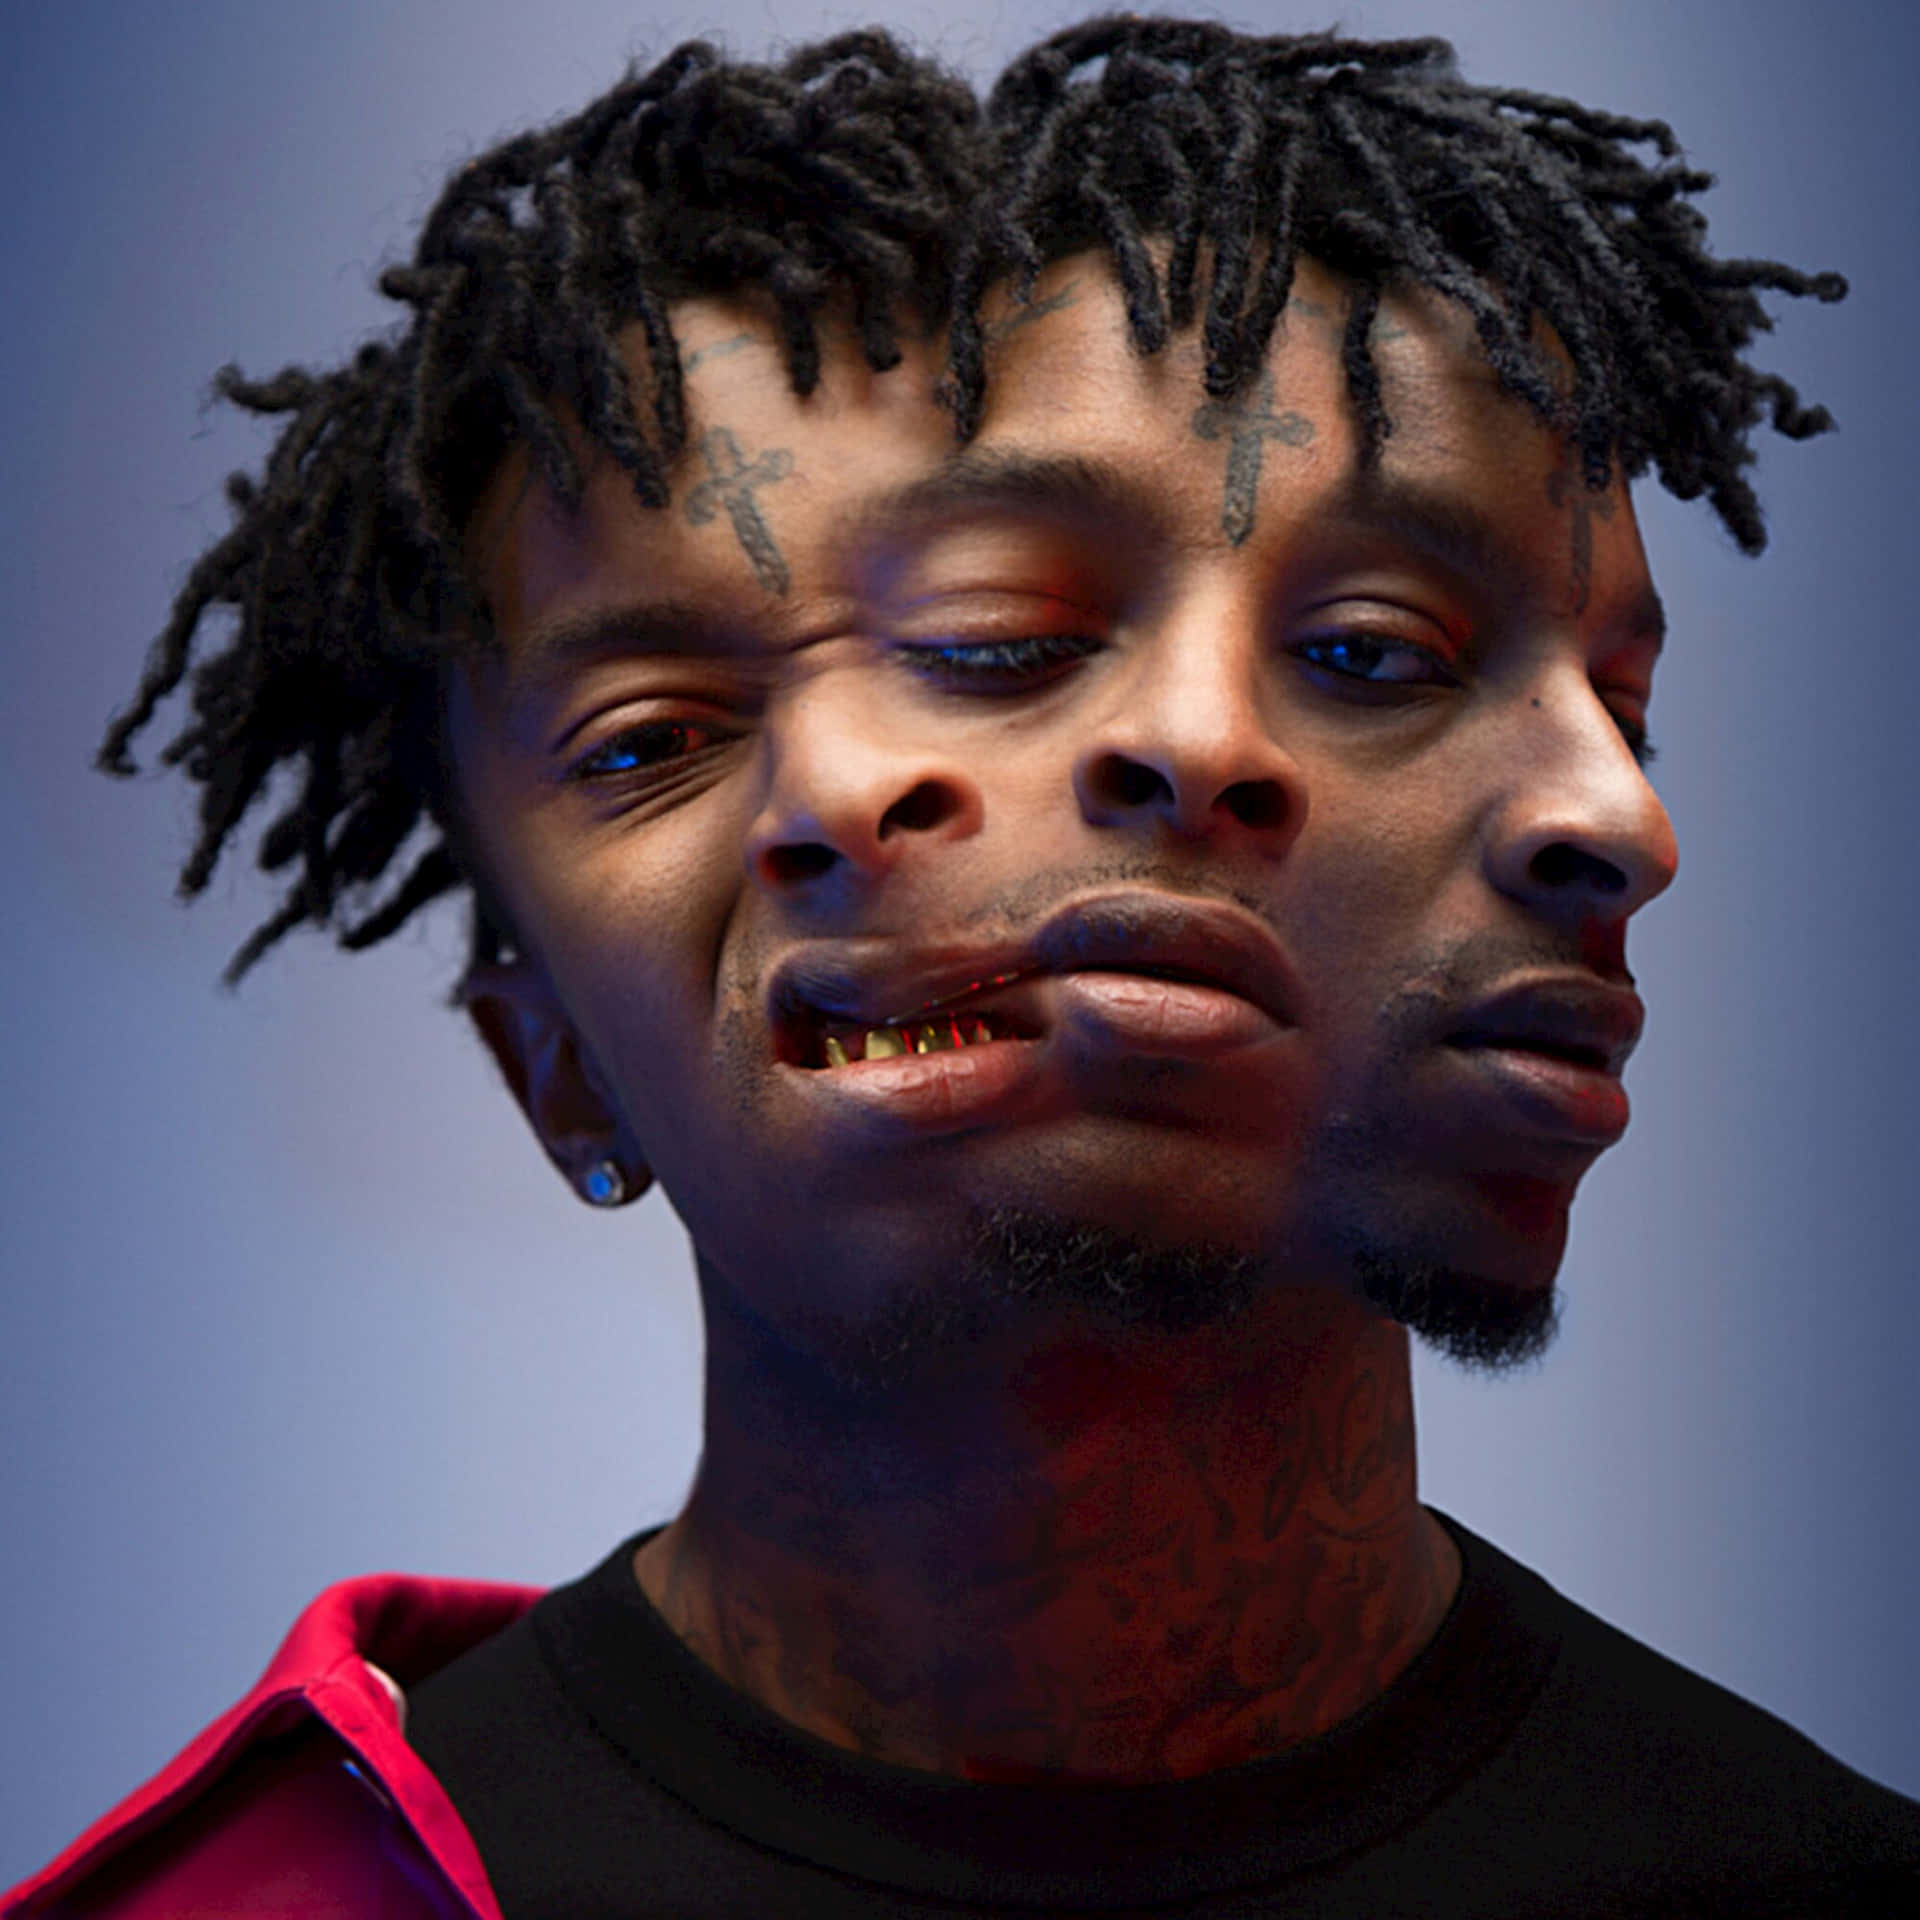 Rapper 21 Savage looking determined and intense